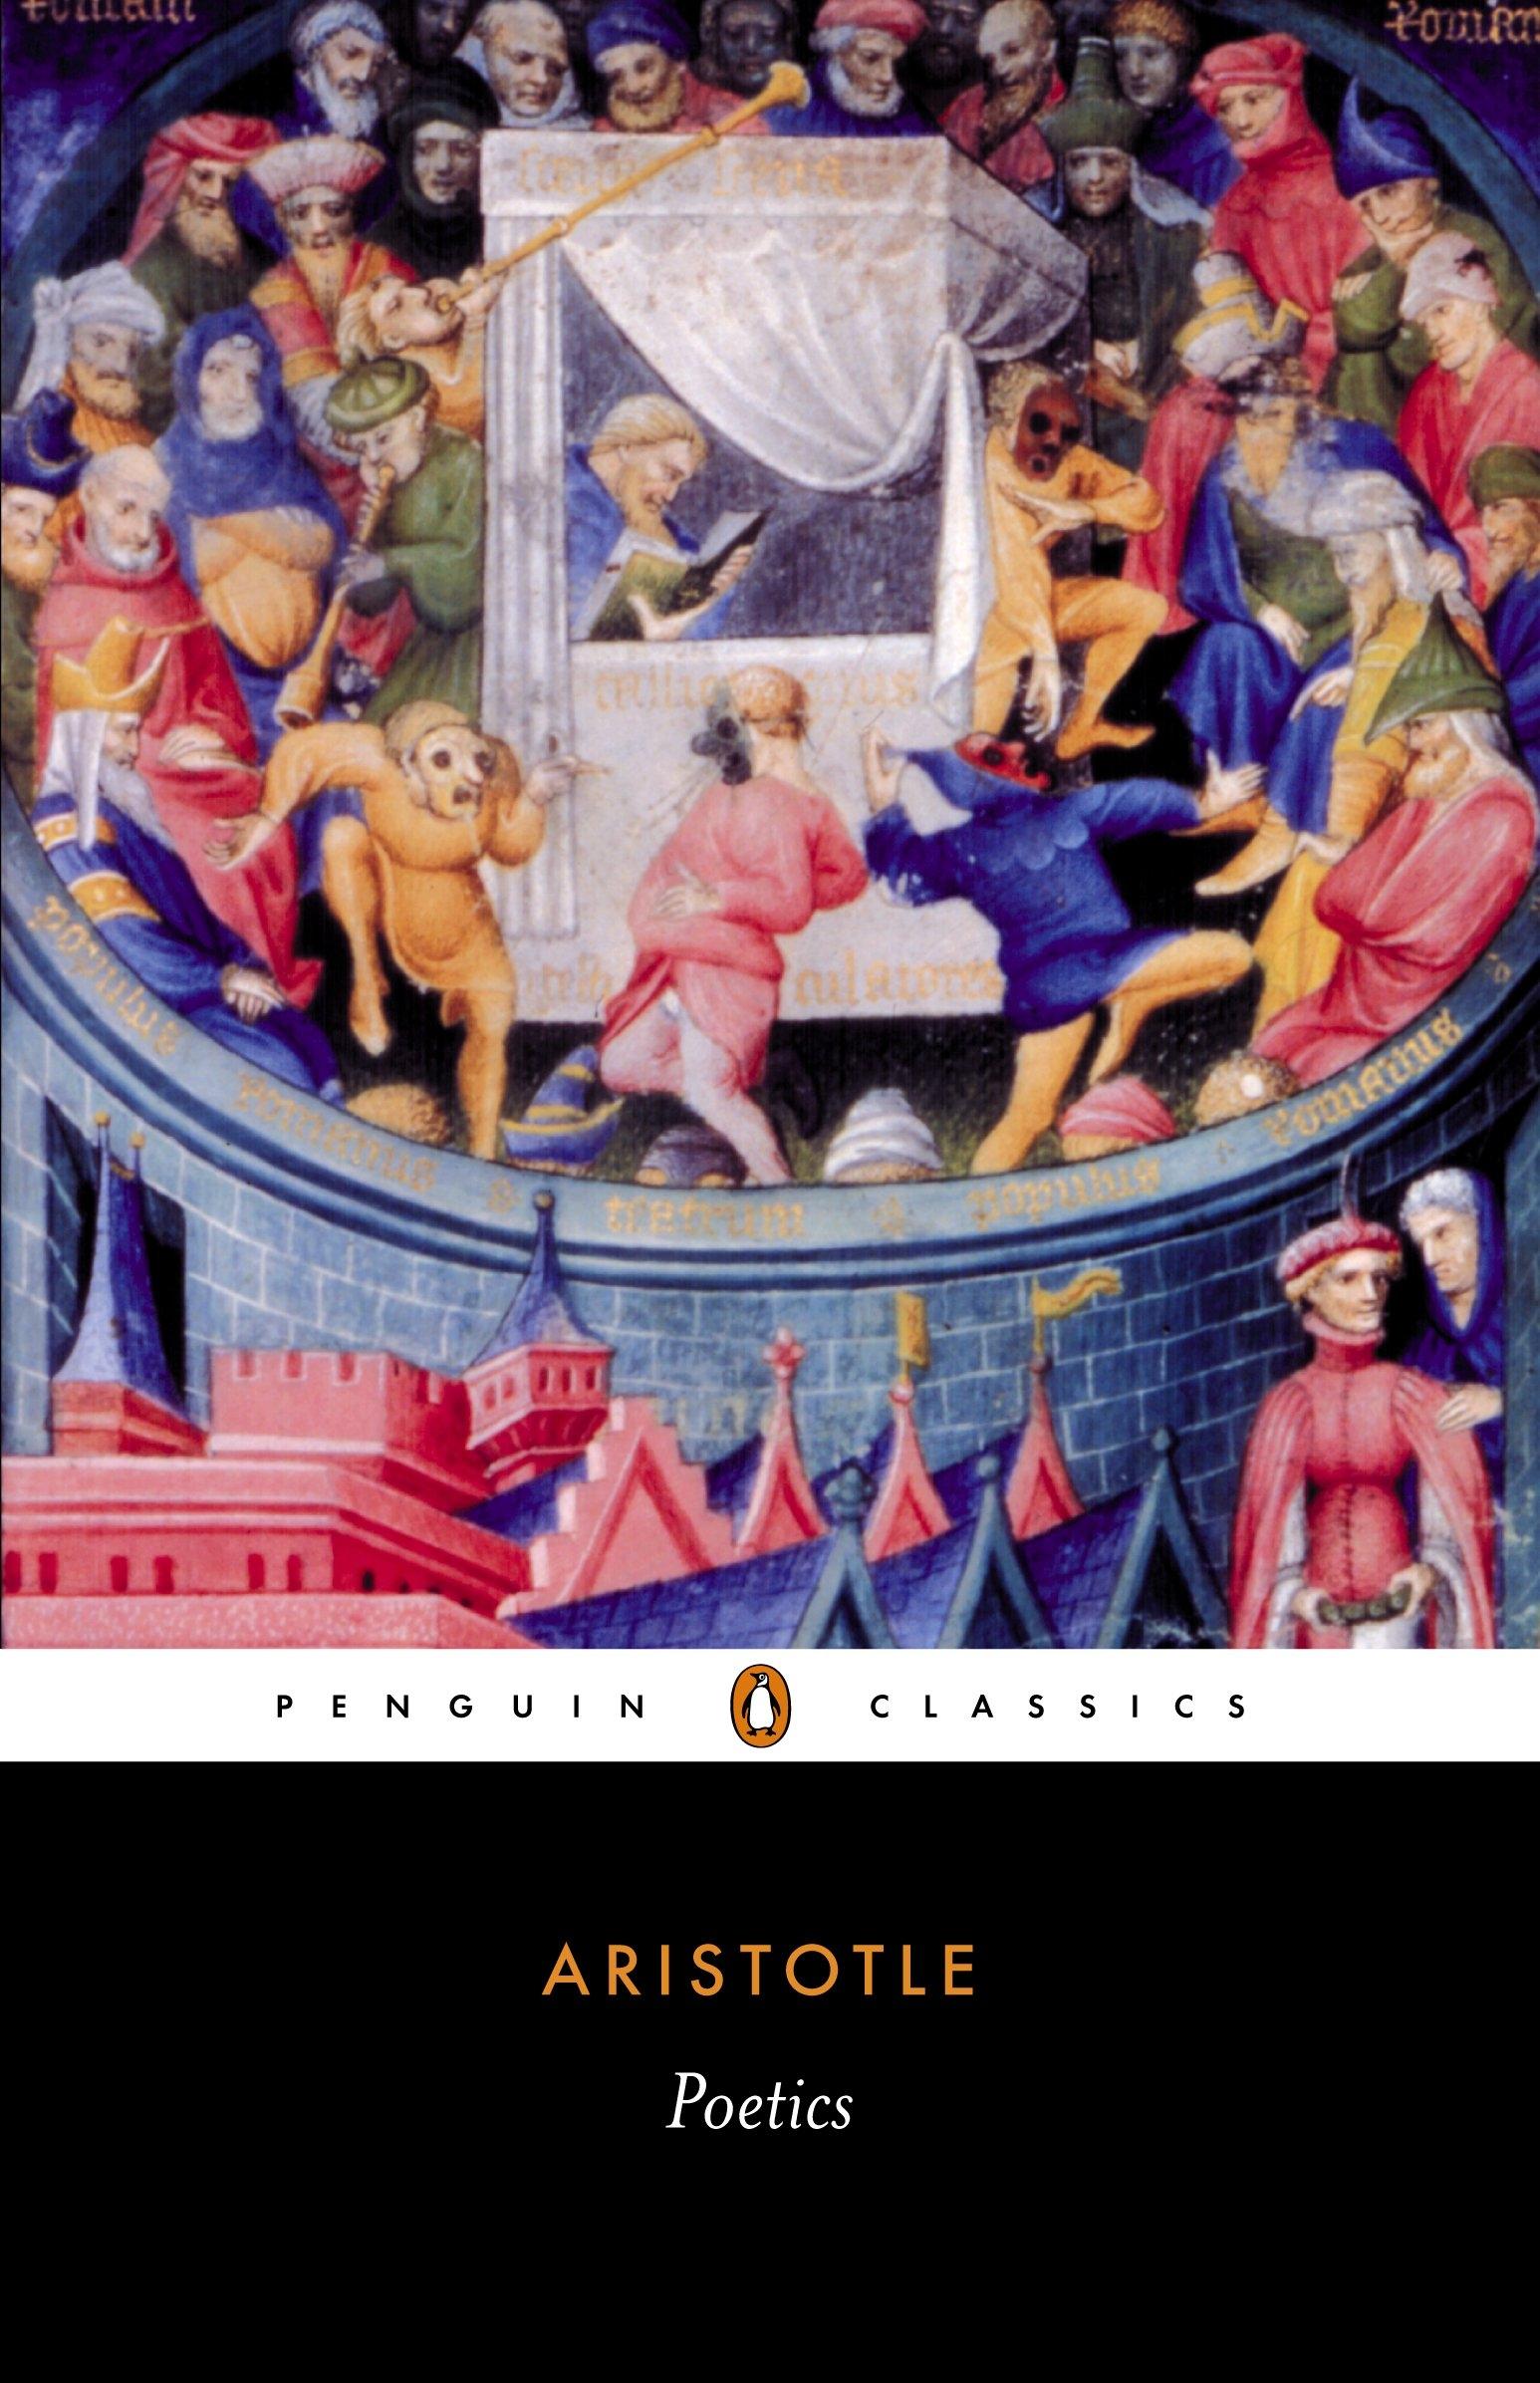 The 10 ancient classics every student should read | The Independent | The Independent